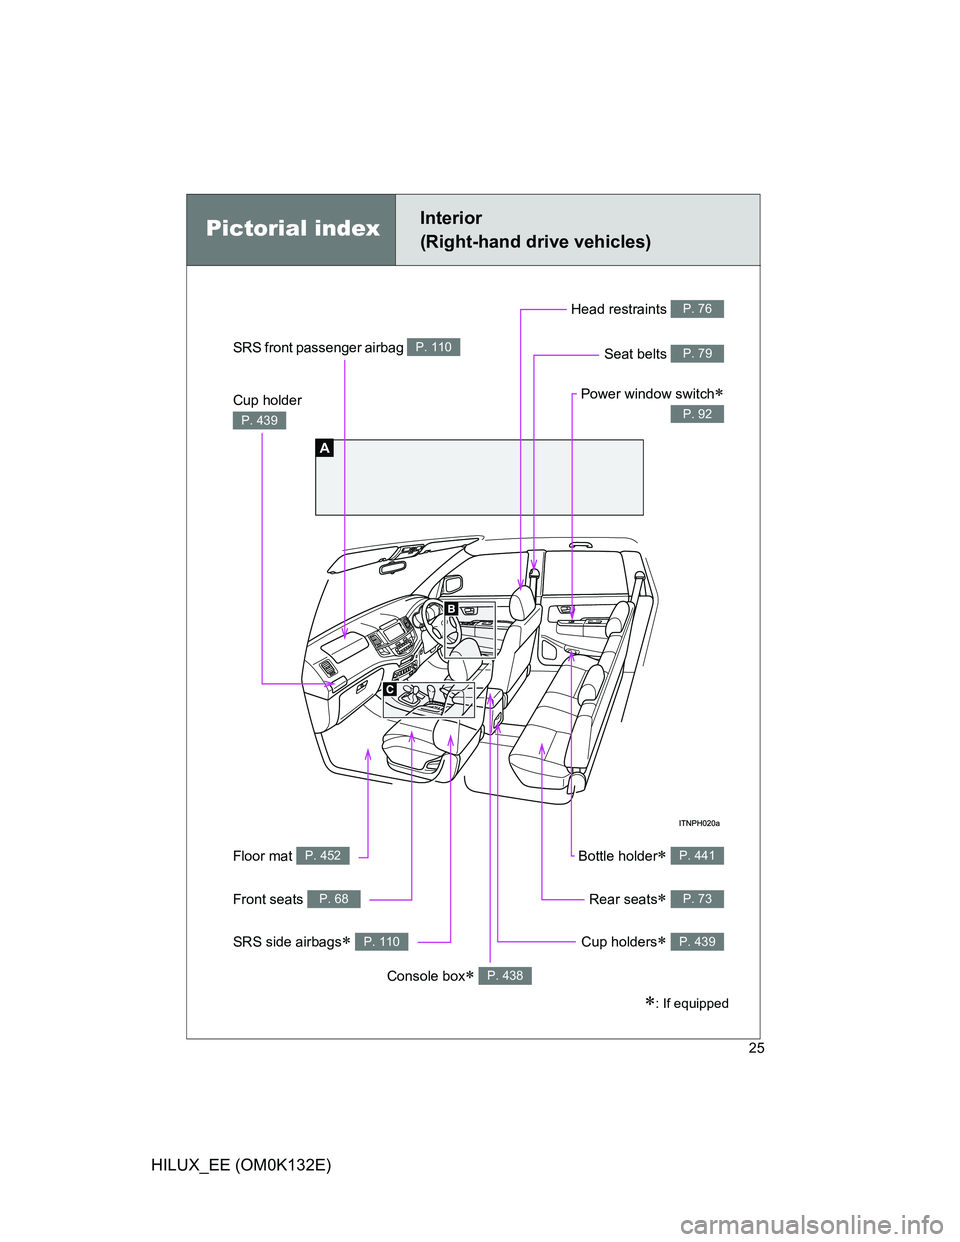 TOYOTA HILUX 2012  Owners Manual (in English) 25
HILUX_EE (OM0K132E)
Pictorial indexInterior 
(Right-hand drive vehicles)
A
Cup holder 
P. 439
Floor mat P. 452Bottle holder P. 441
SRS front passenger airbag P. 110
SRS side airbags P. 110
Re